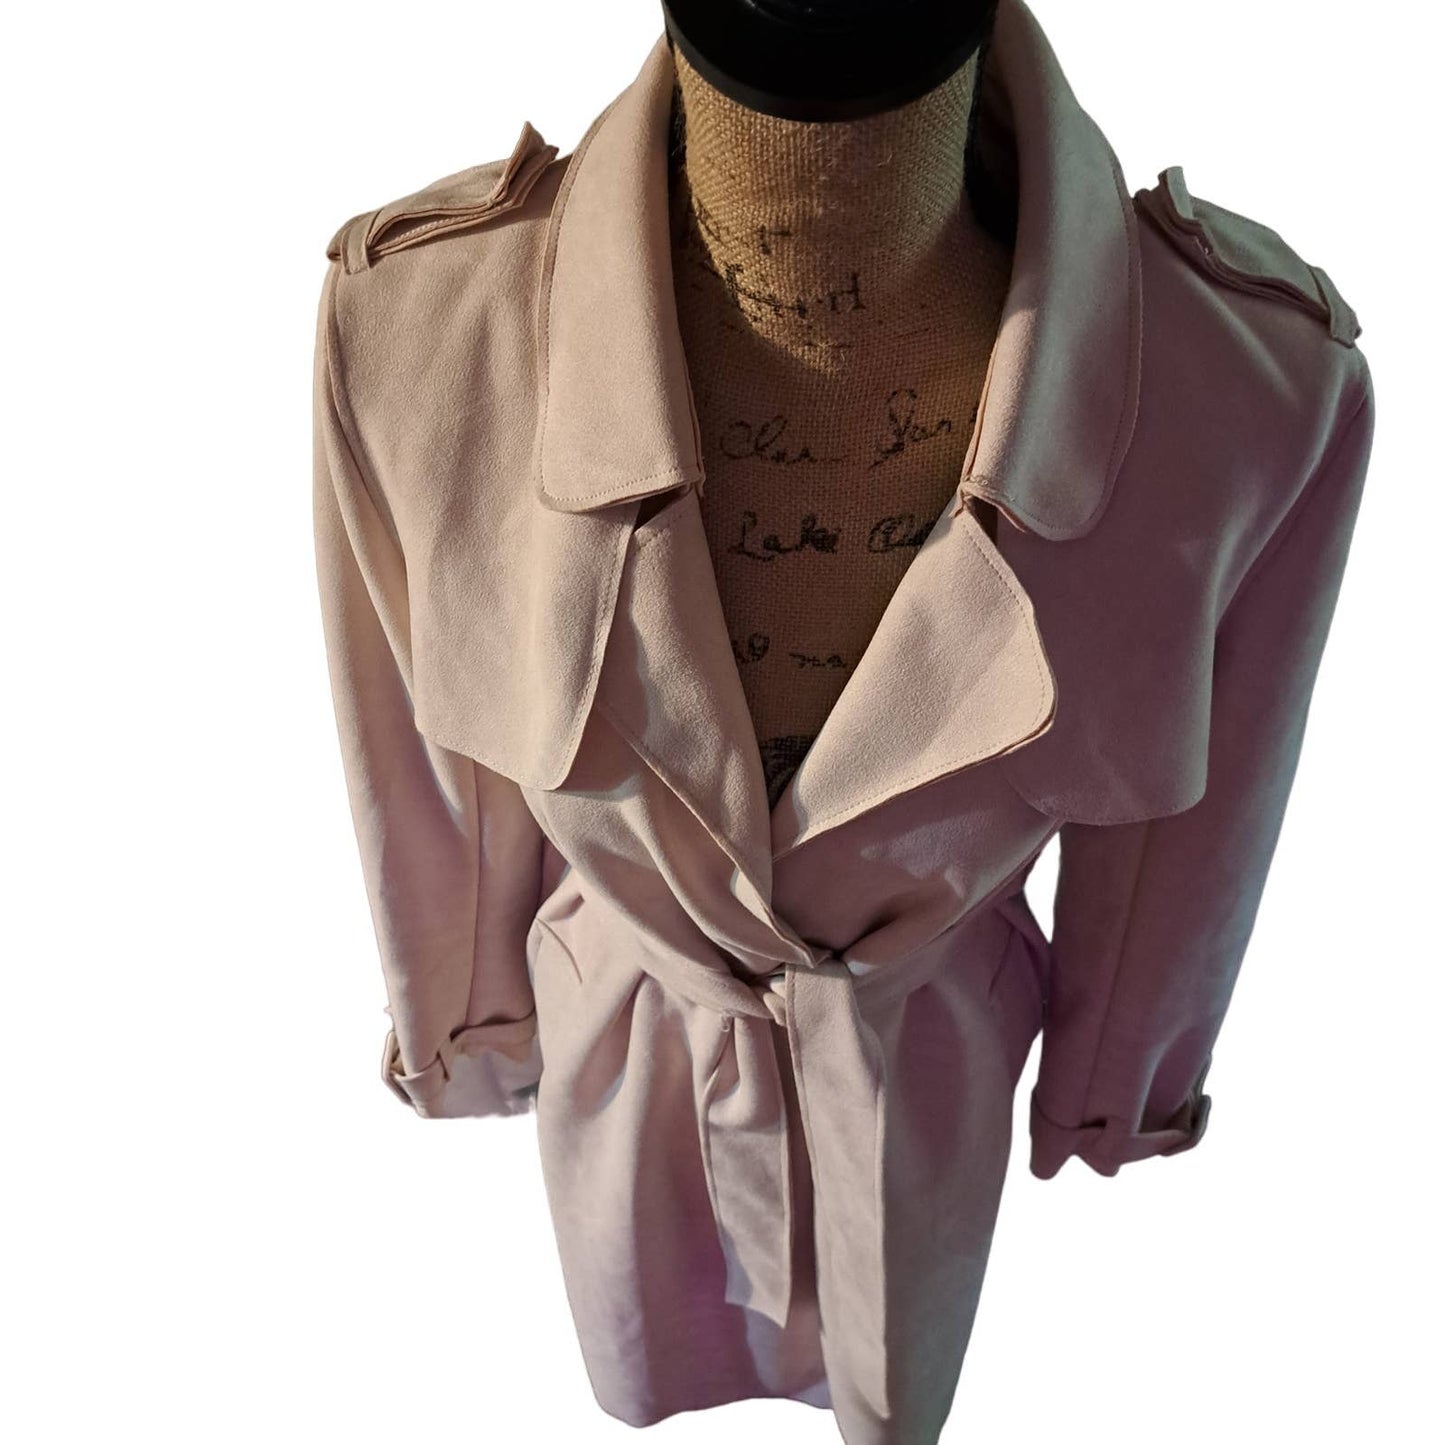 T TAHARI NEW Champagne color Faux-Suede Belted Trench Coat SZ Small